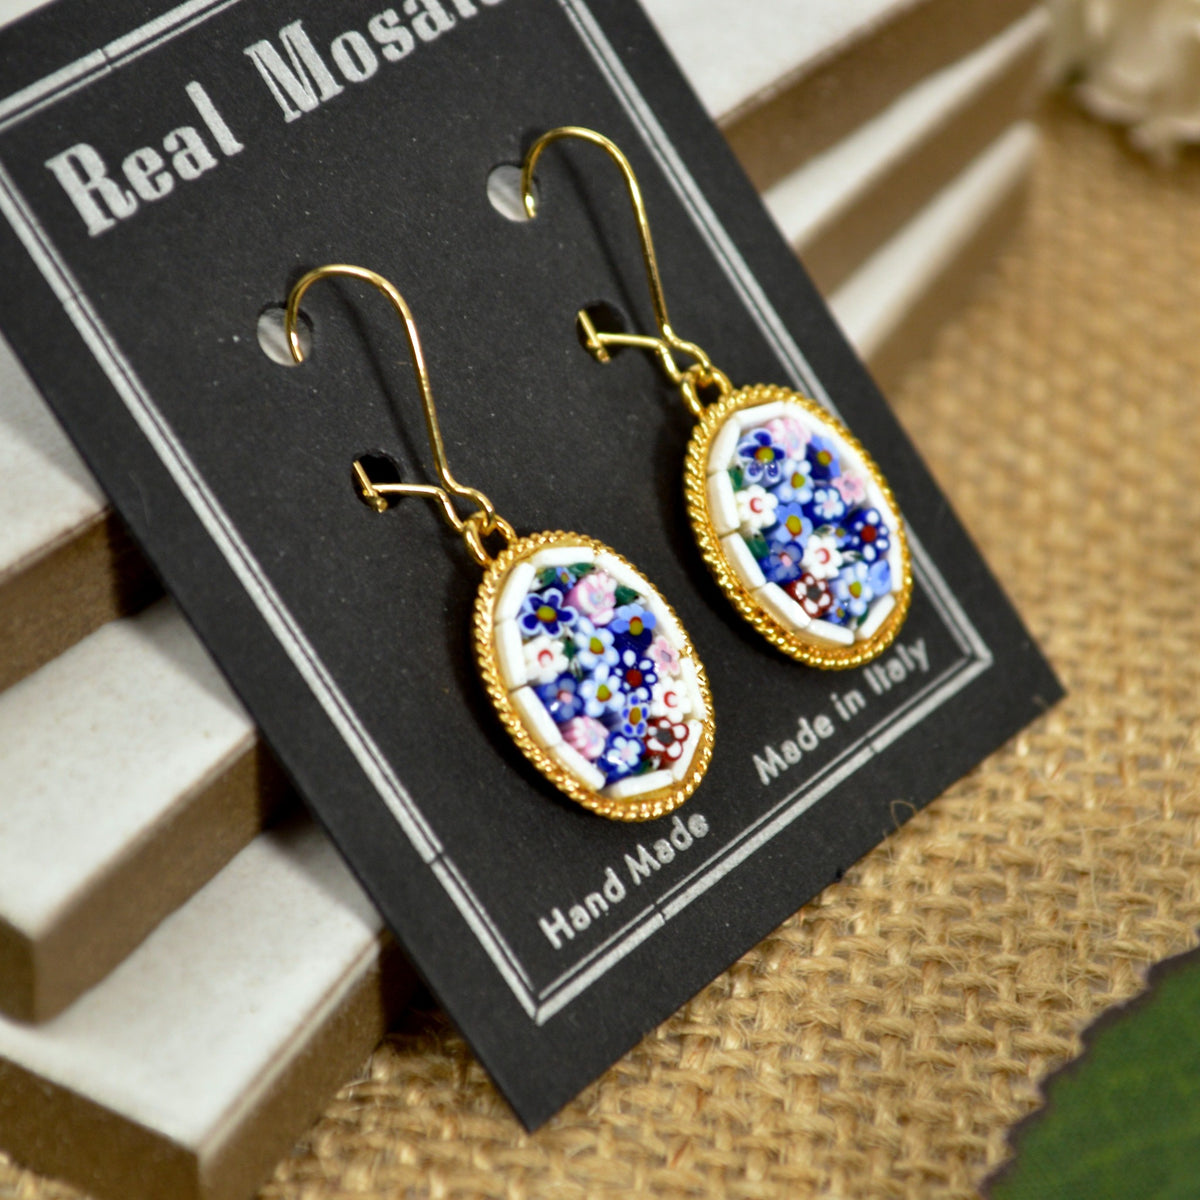 Florentine Micro Mosaic Earrings, Oval, Made in Italy - My Italian Decor